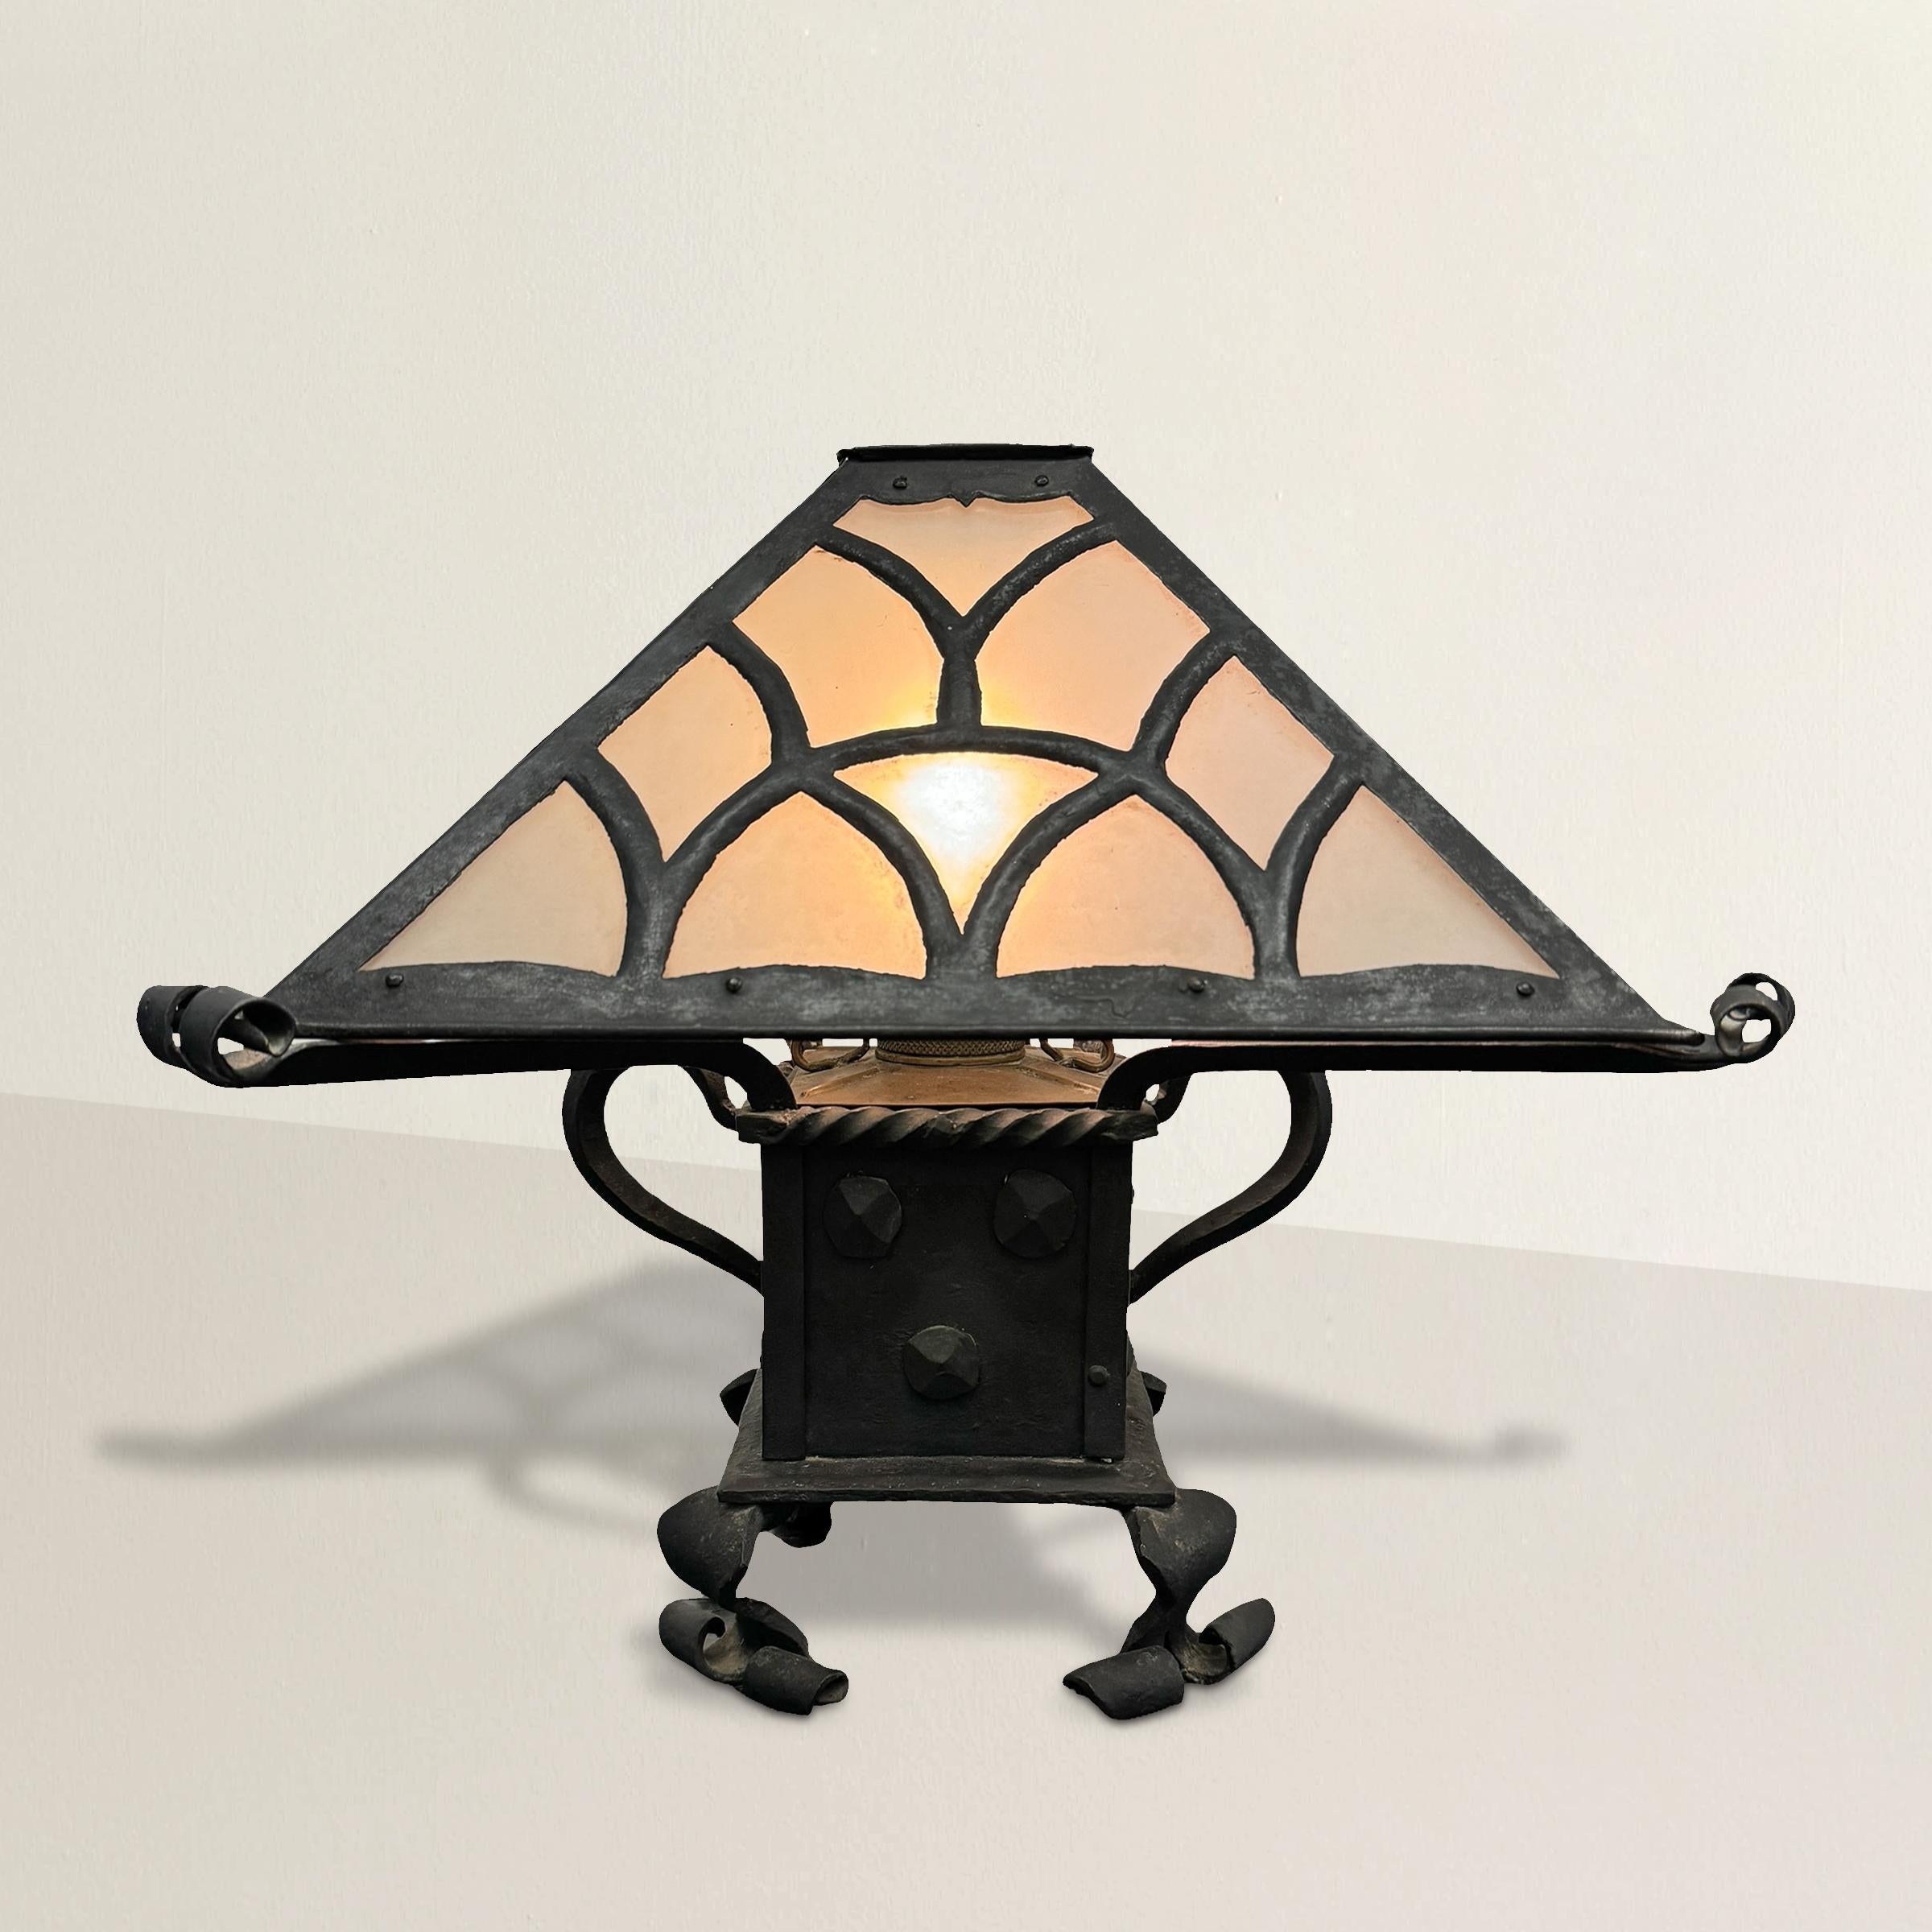 This late 19th/early 20th-century American Arts and Crafts hand-wrought iron oil lamp is an absolute masterpiece of design and craftsmanship. Now electrified for modern convenience, this lamp retains its original beauty and charm while seamlessly